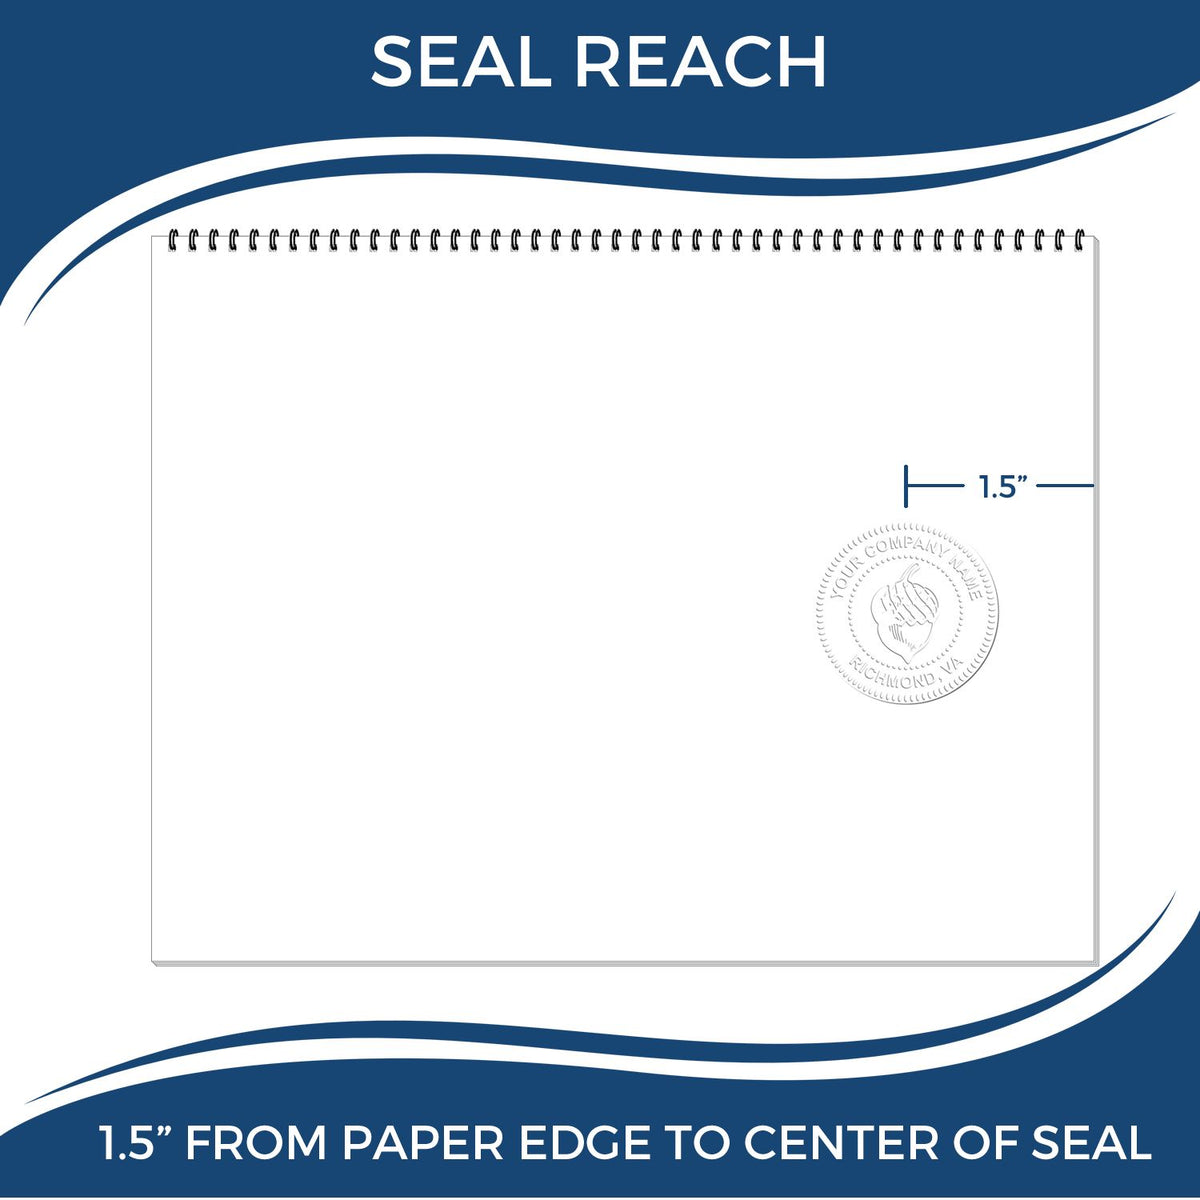 An infographic showing the seal reach which is represented by a ruler and a miniature seal image of the Hybrid Michigan Architect Seal